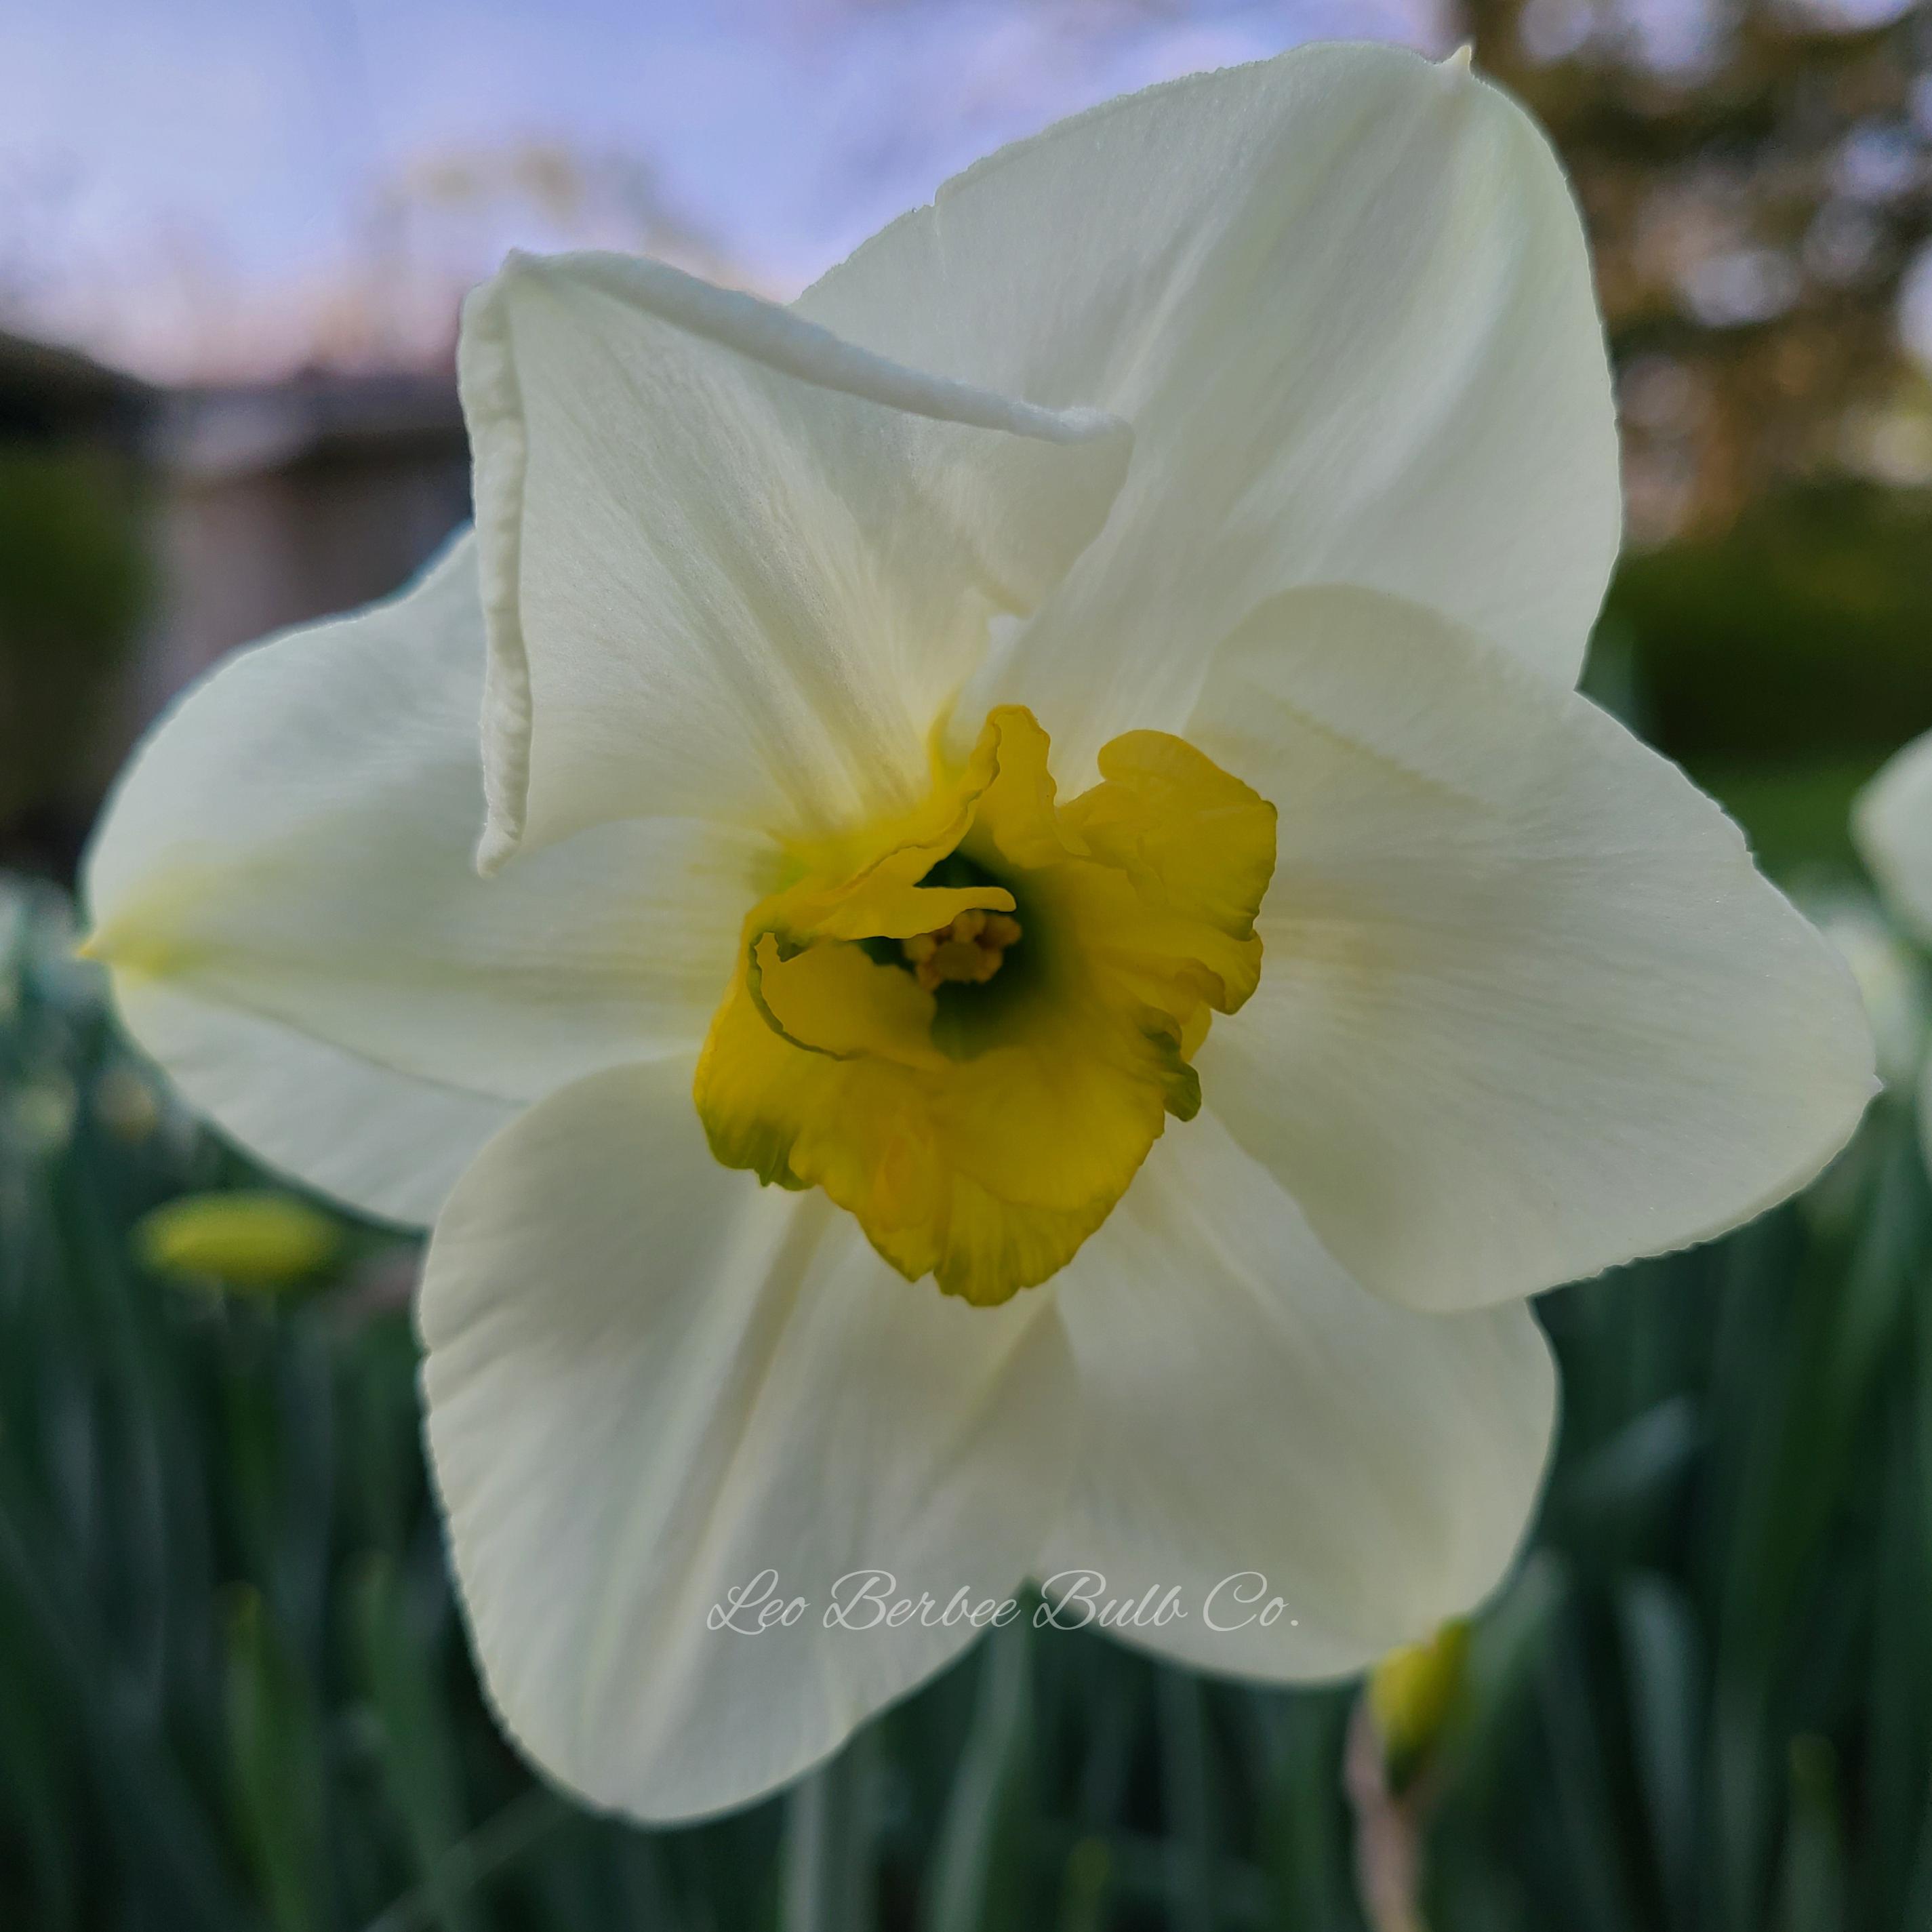 Daffodil Small Cupped 'Green Eyes' - Coming Soon for Fall 2022! from Leo Berbee Bulb Company